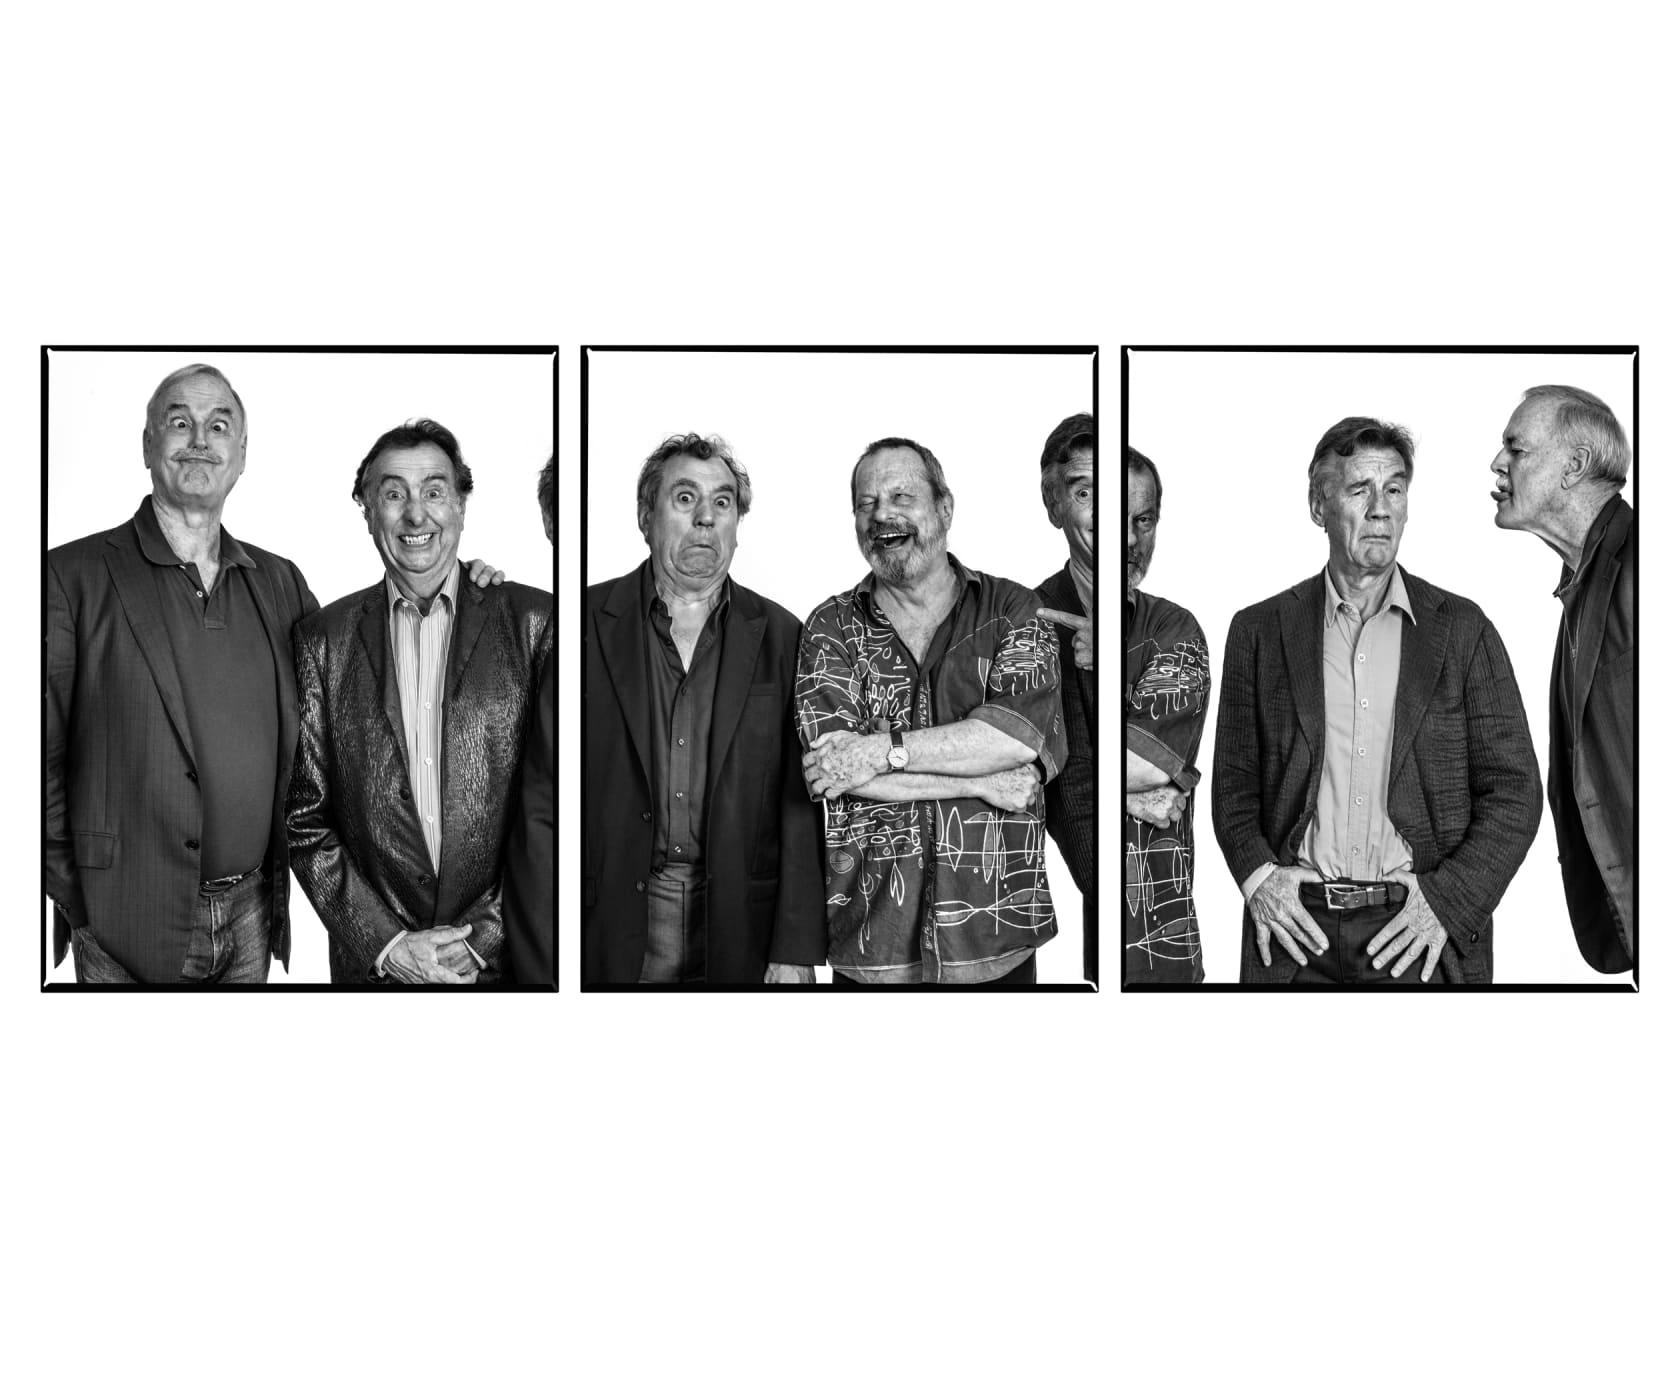 Andy Gotts, John Cleese, Eric Idle, Terry Jones, Michael Palin, Terry Gilliam - Triptych, 2021